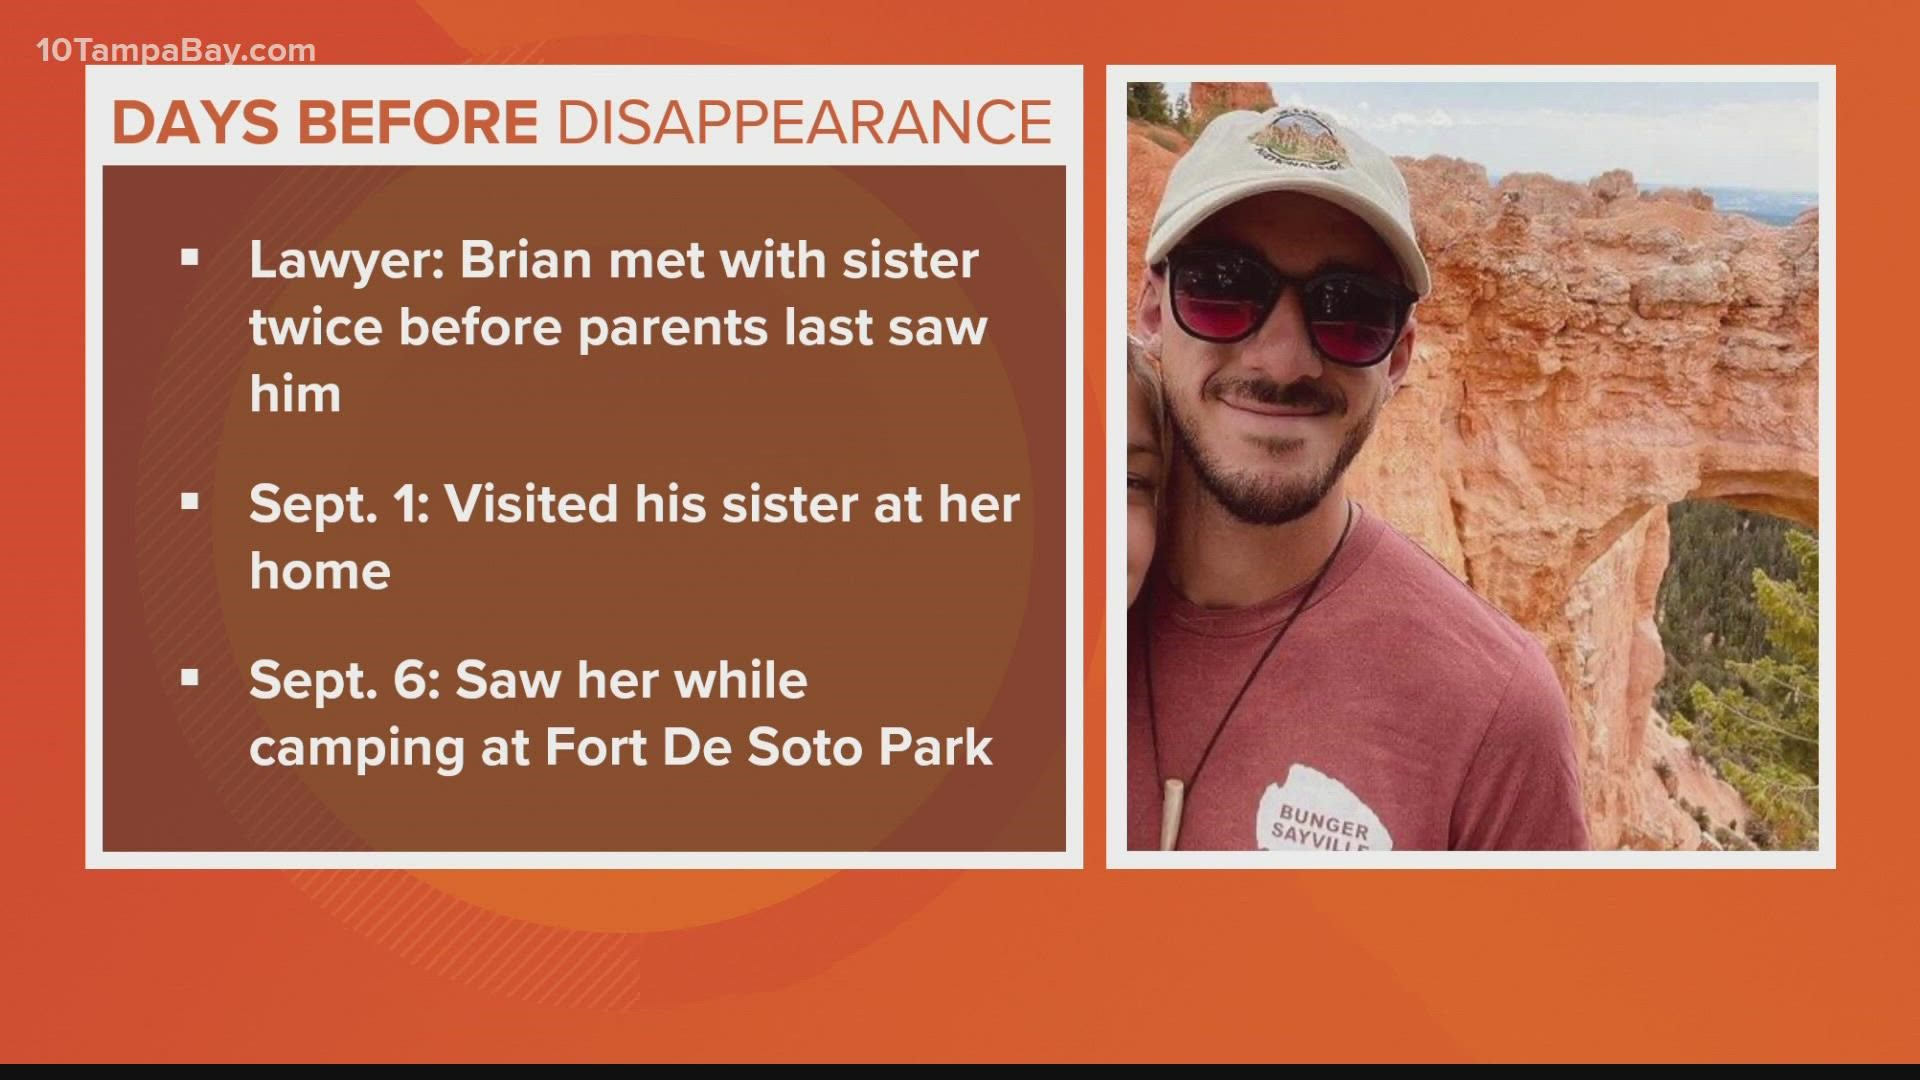 One of those meet-ups was on Sept. 6 at Fort De Soto Park, where records show Brian and his parents had camped.